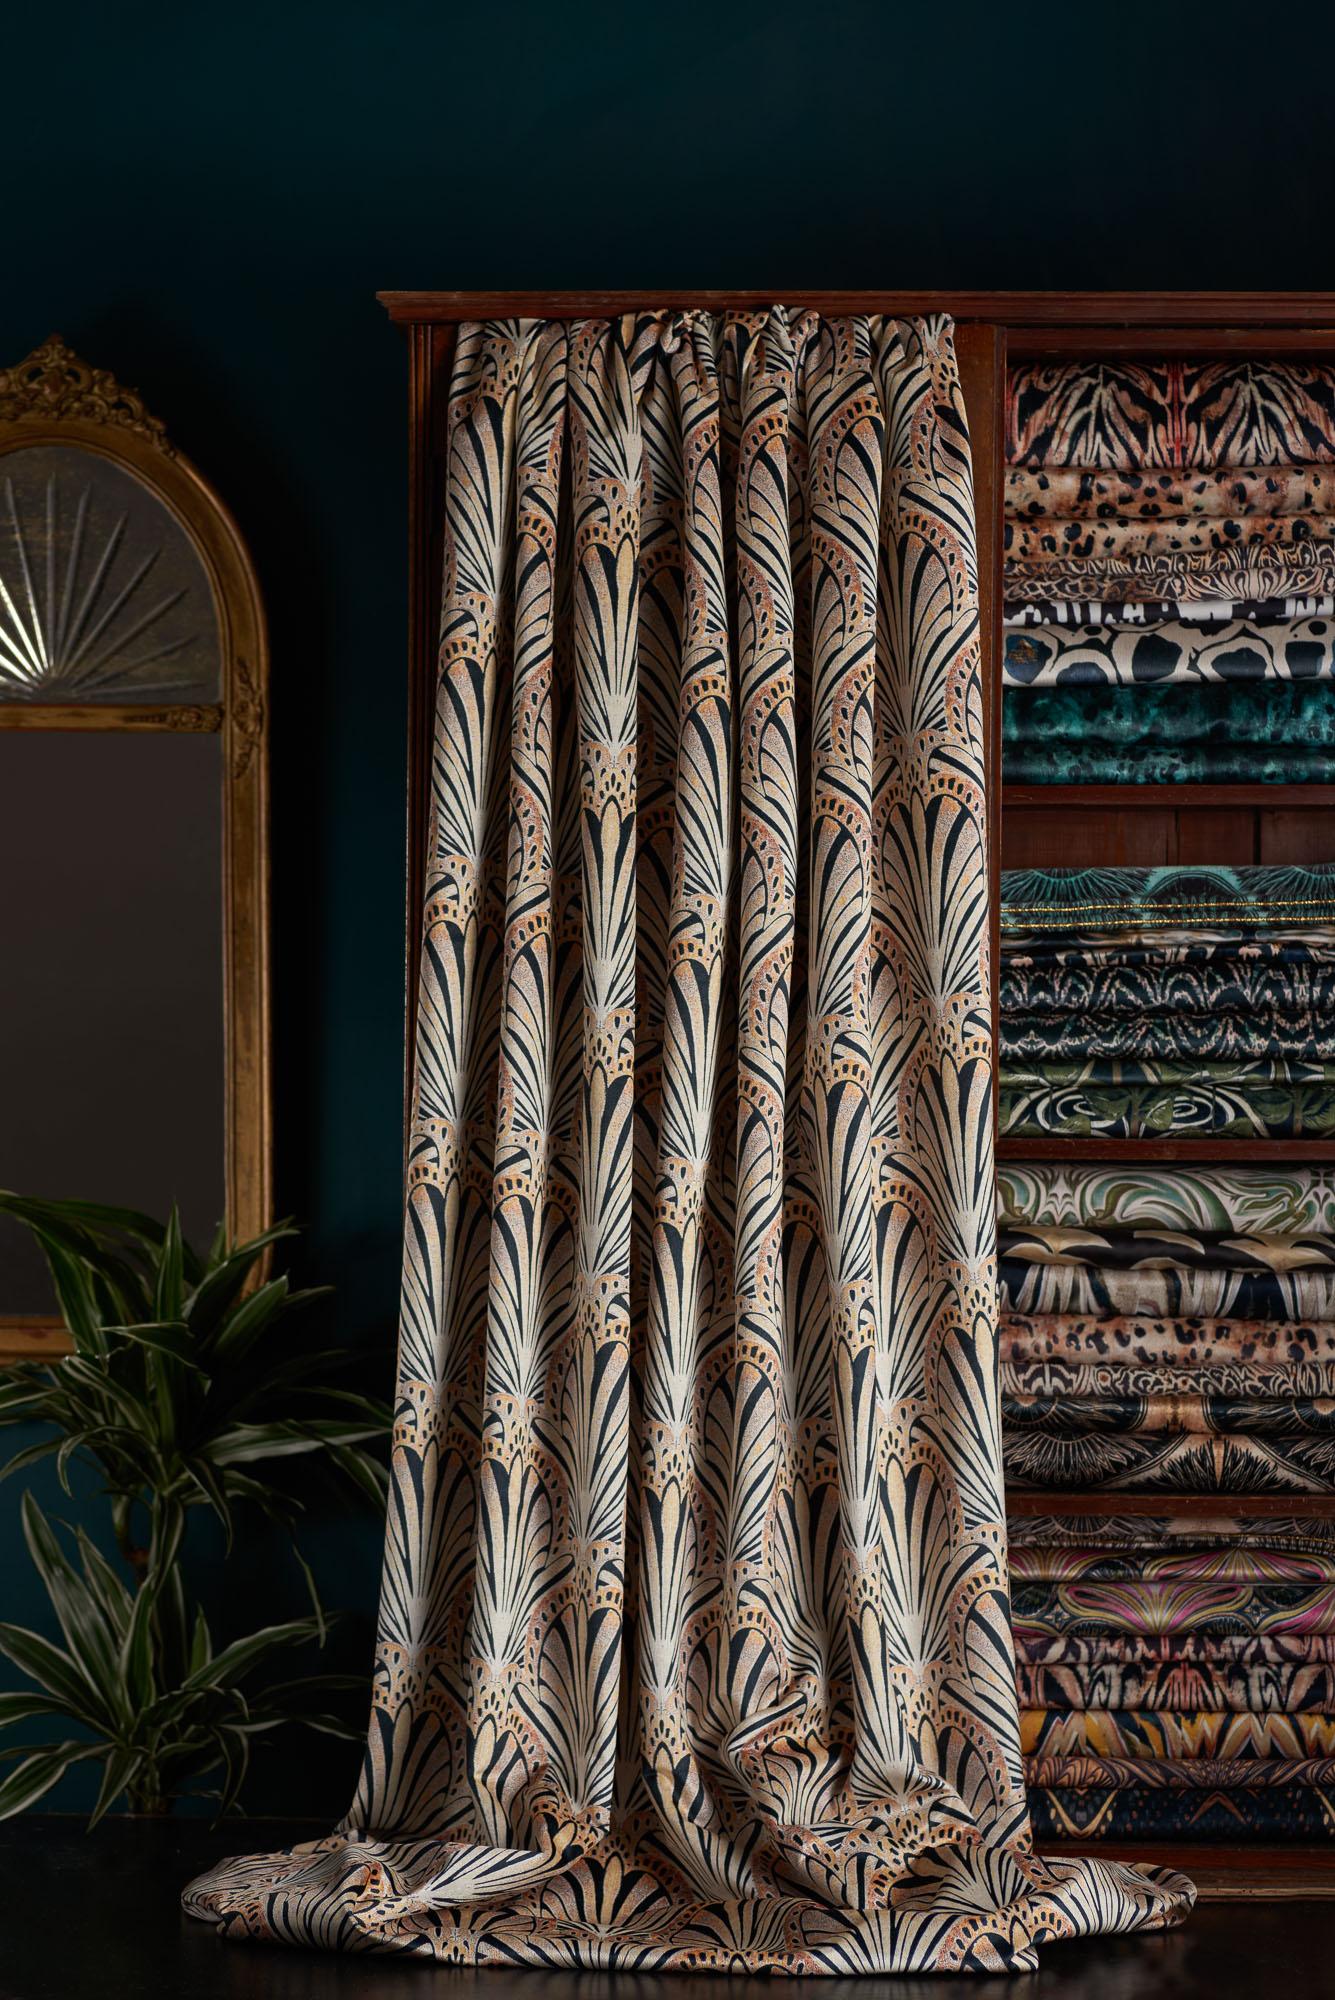 Jada is a 1920s inspired print. This fan-like lino printed design in gold black and peach tones evokes a timeless ambience.

This velvet is midweight, with a strong straight woven backing, so is suitable for upholstery, but is also light enough for